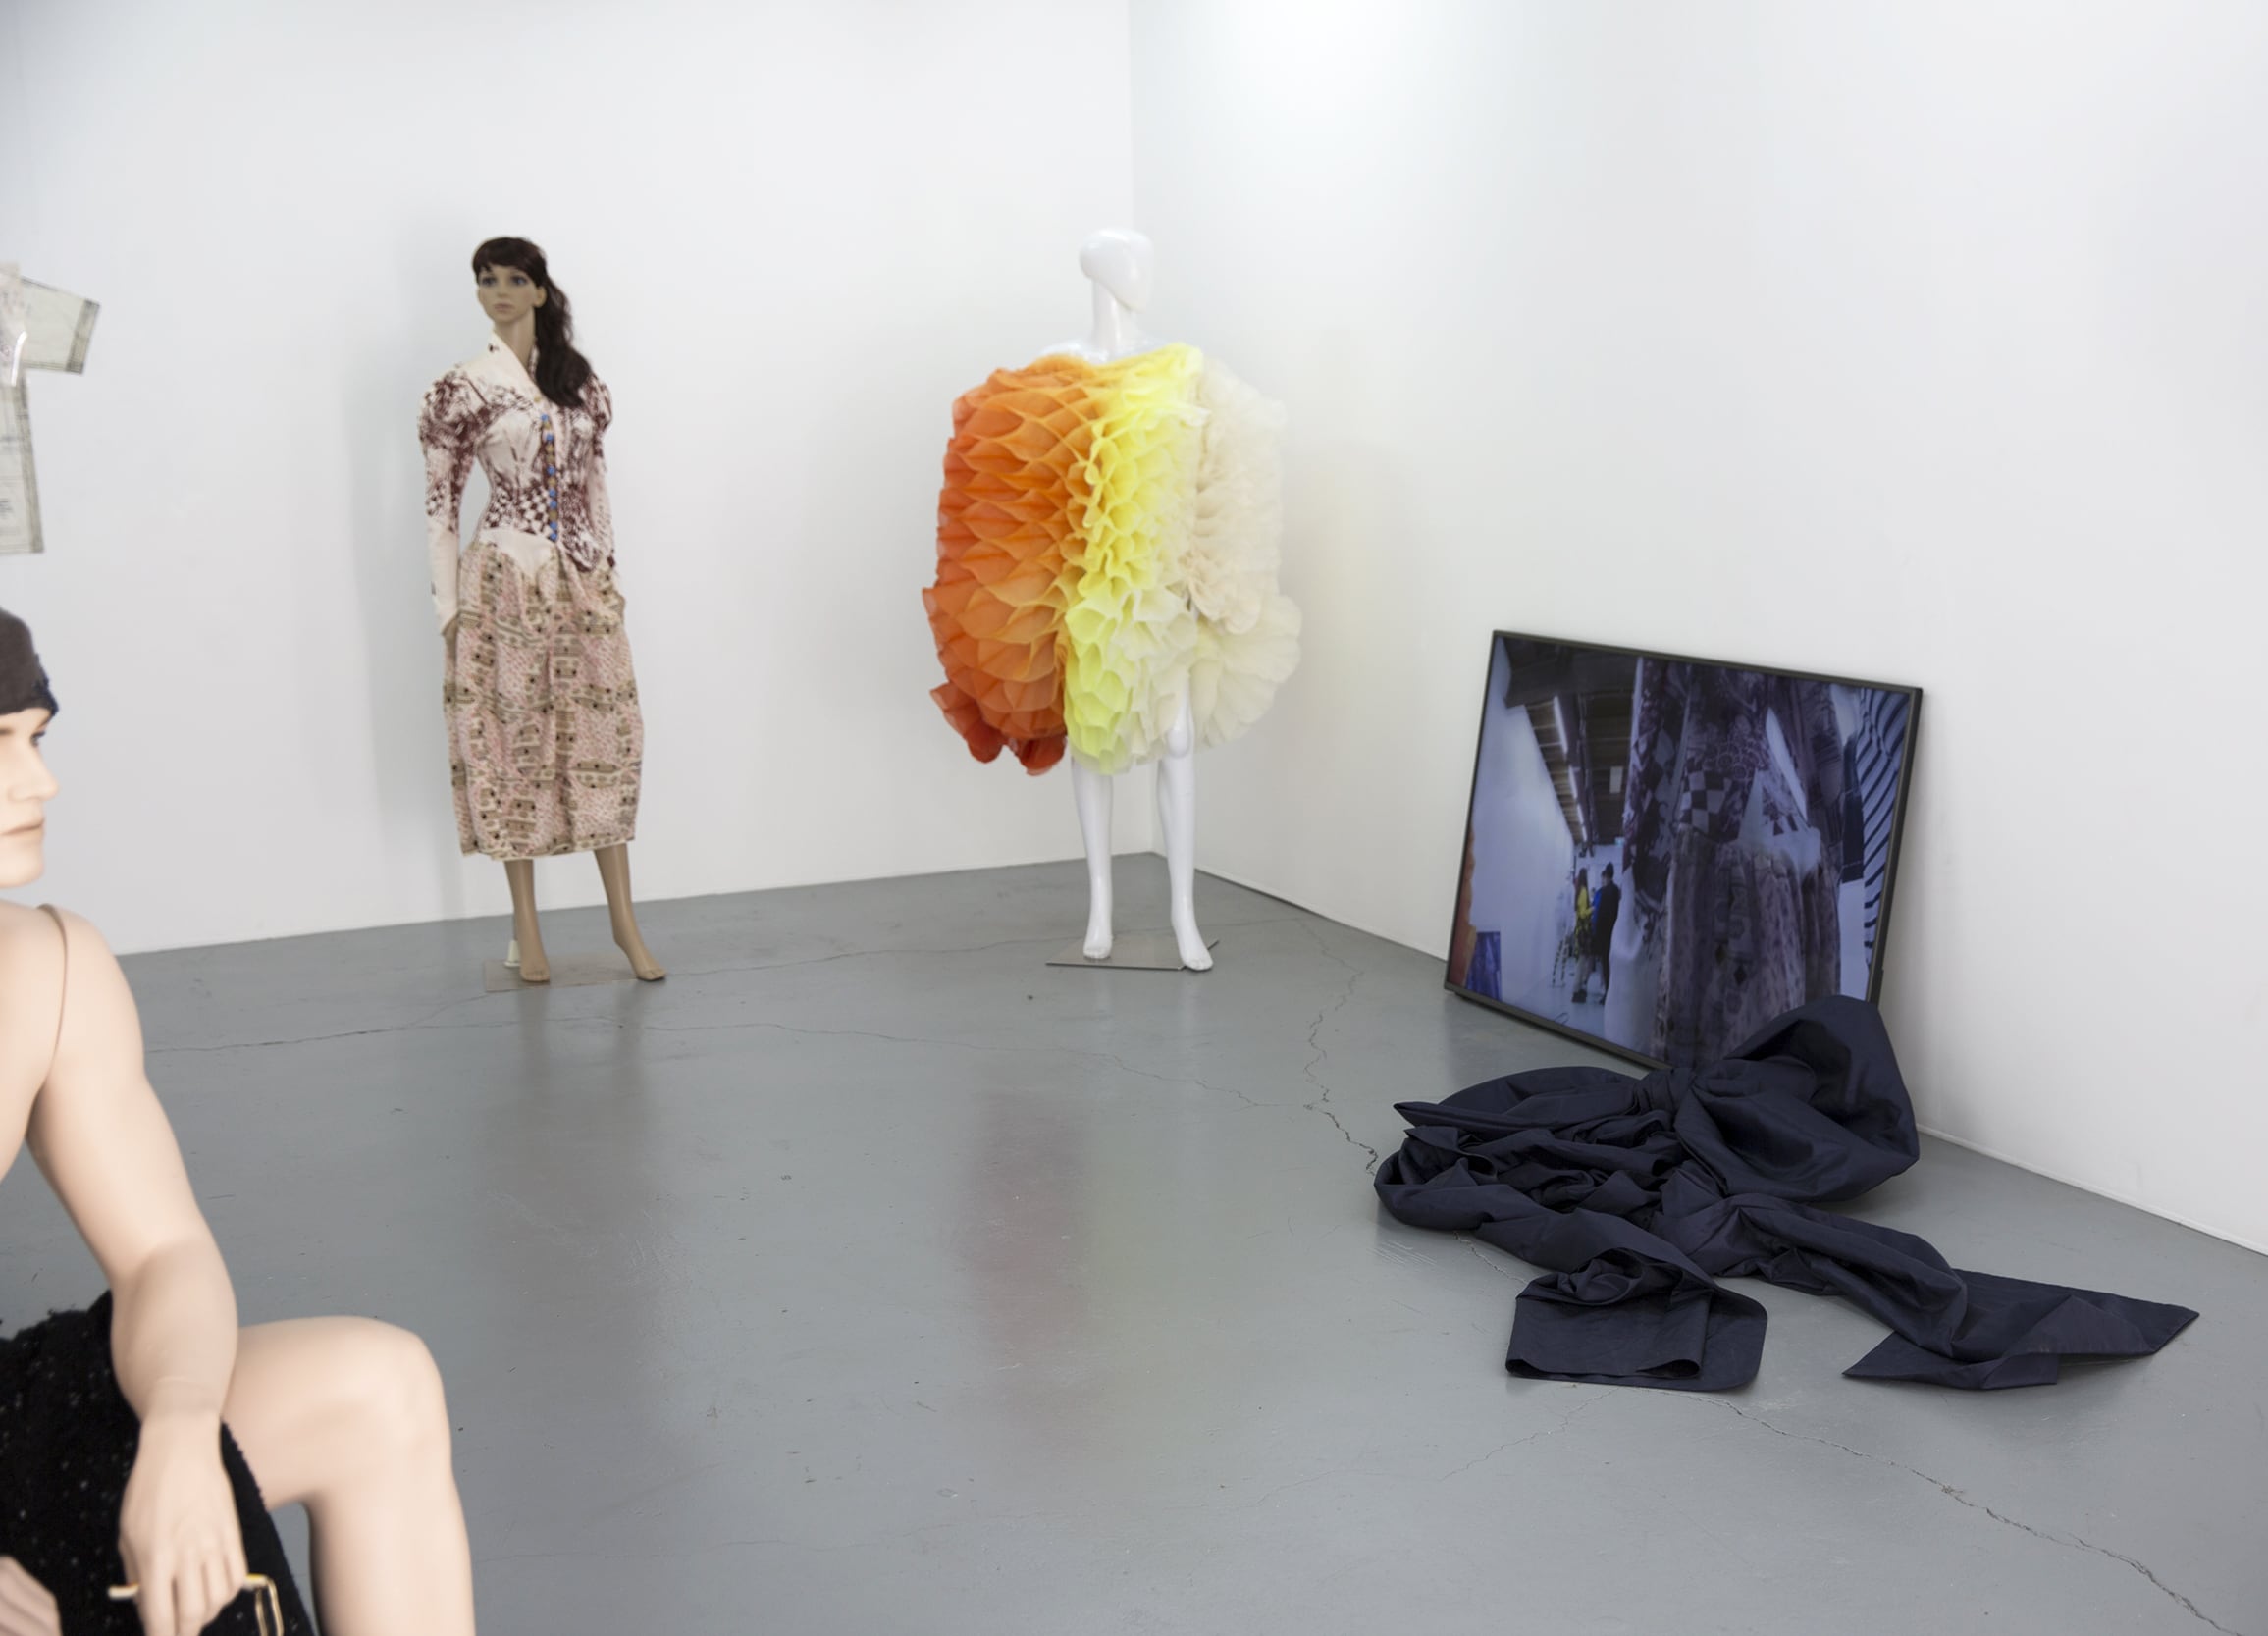 Image 02: Installation view, Gallery 1 L-R: Women’s History Museum, Orange peel fugitive purple optical dress, 2018, screen printed bodice, C. 1860 quilting print skirt, and Czech deco buttons; Zhuxuan He, Untitled, 2016, Hand-dyed silk organza; Megan Hanson, ‘…it loveswithout condition or discrimination, but only once the material labour of its construction has been dismissed.’, 2018, performance video. Image: Rafaela Pandolfini.